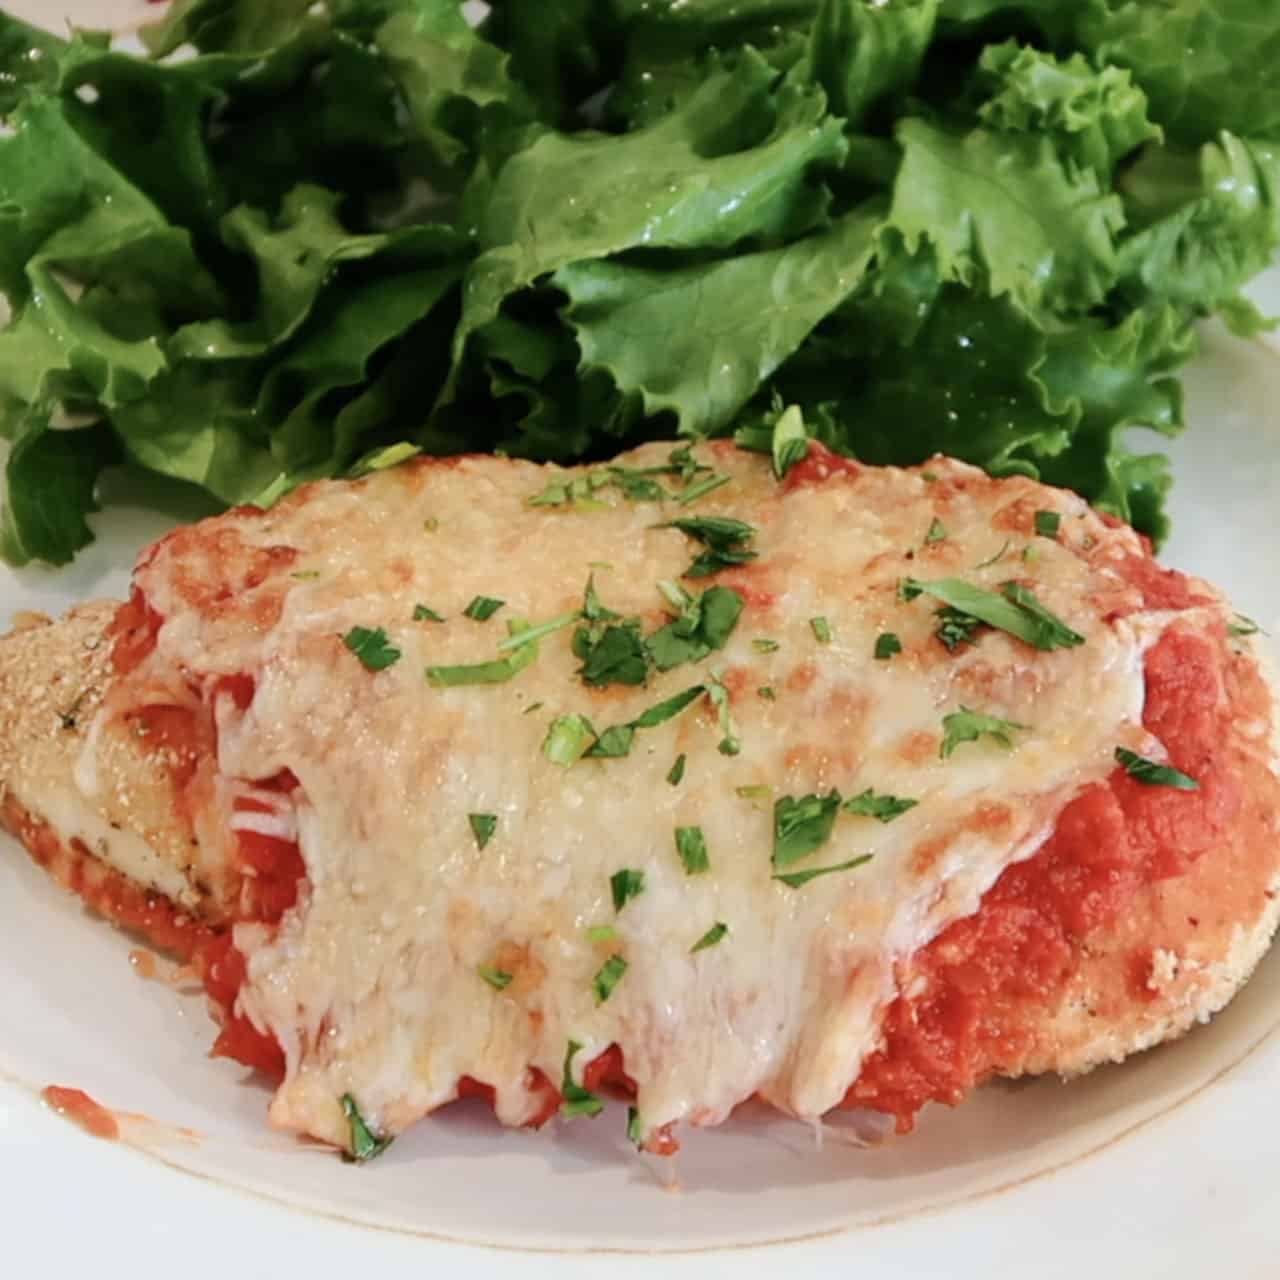 oven baked chicken parmesan on a plate with salad